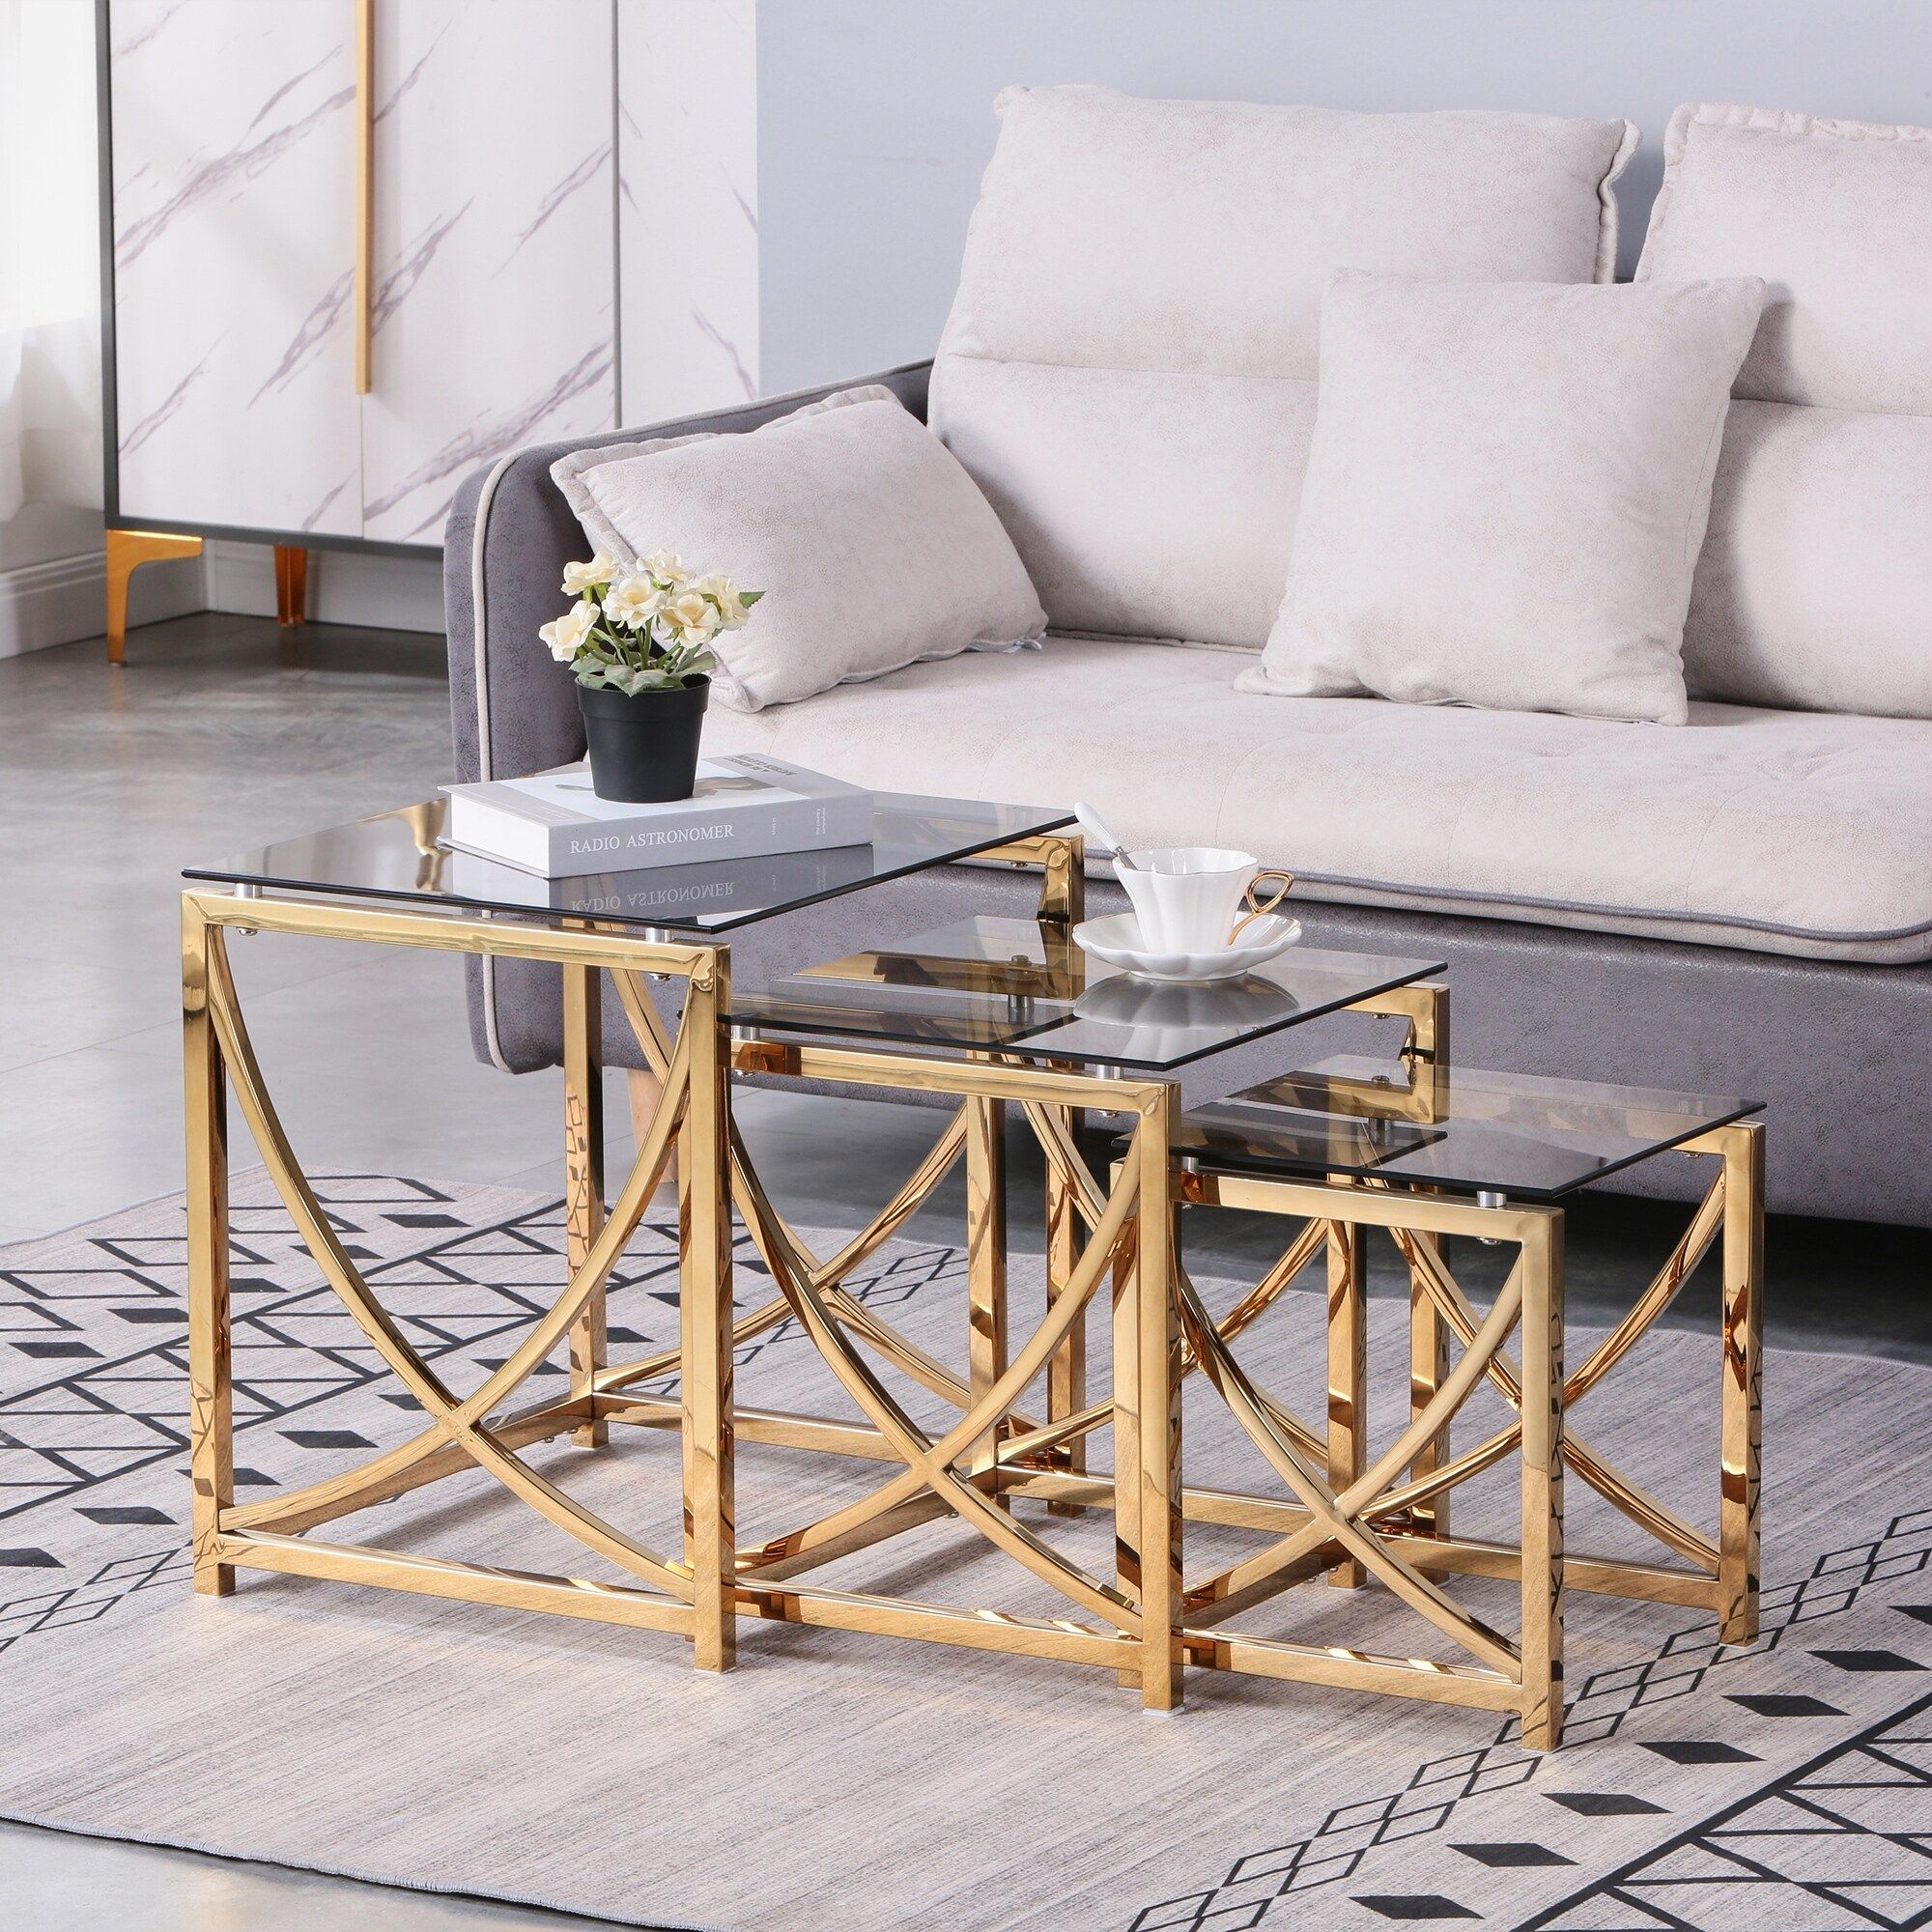 3 Pieces Square Nesting Glass End Tables – Bed Bath & Beyond – 36662984 Within Coffee Tables Of 3 Nesting Tables (View 14 of 15)